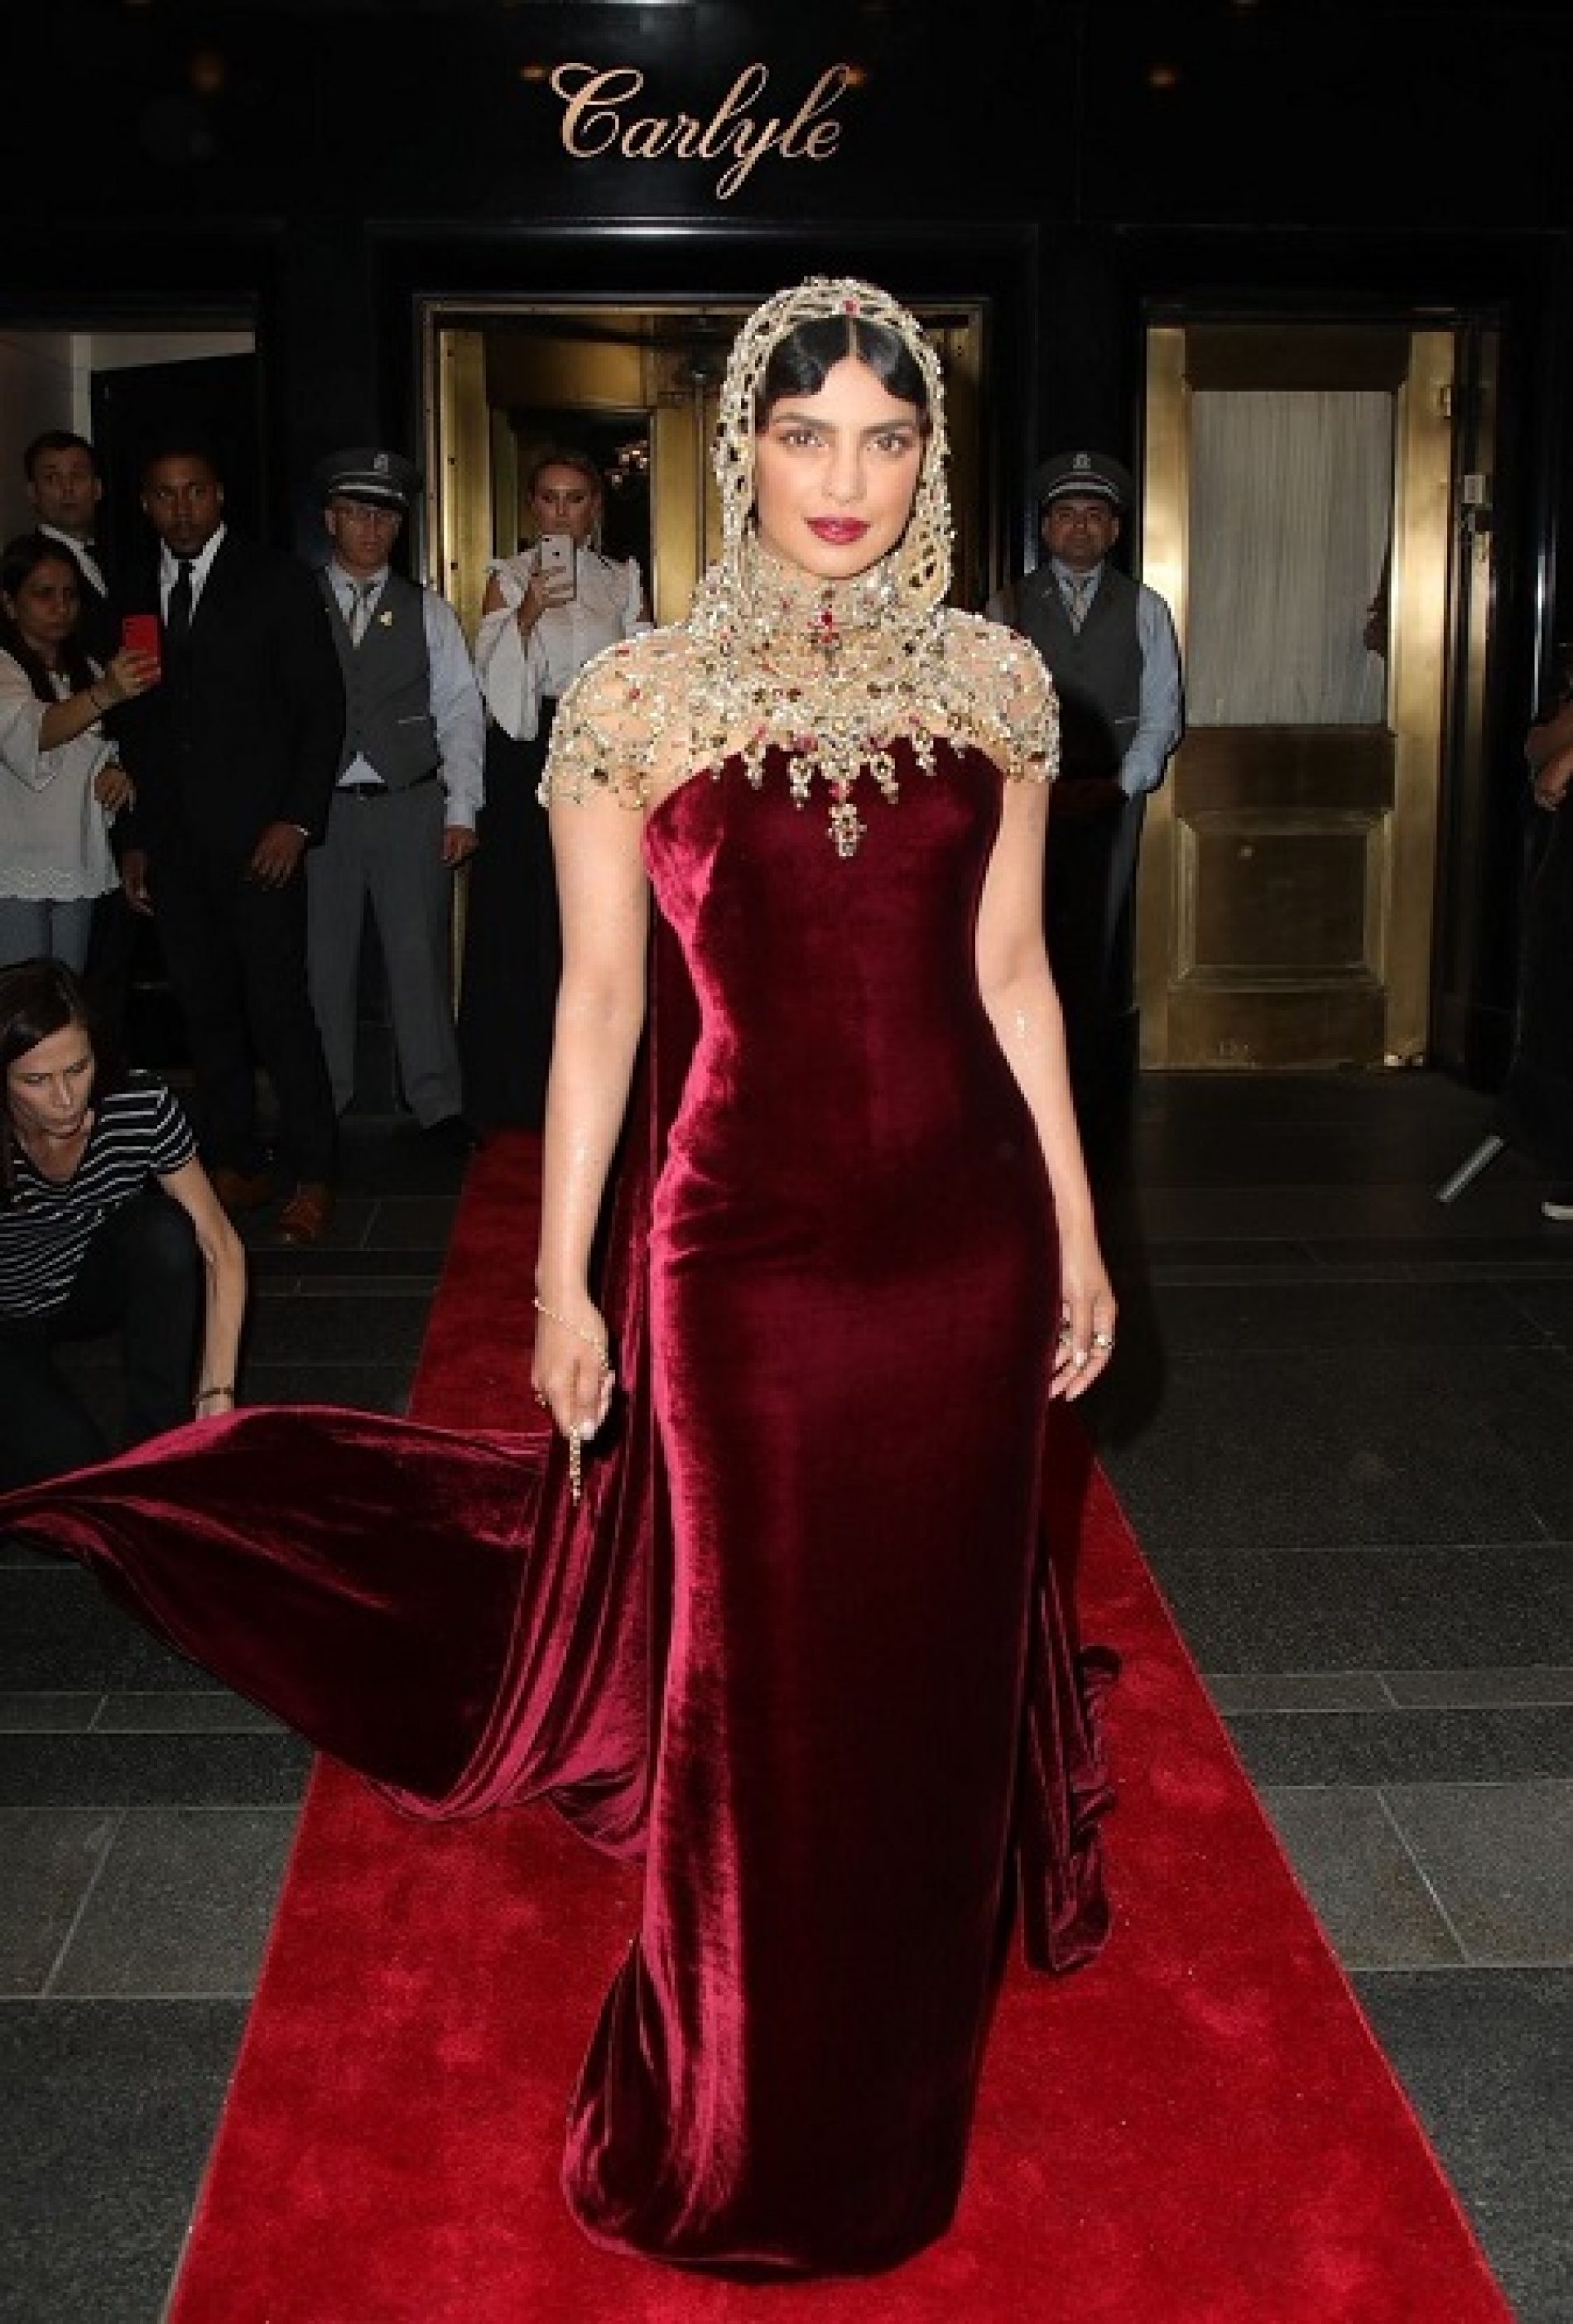 The #MetGala Story We Wish Hollywood Would Tell